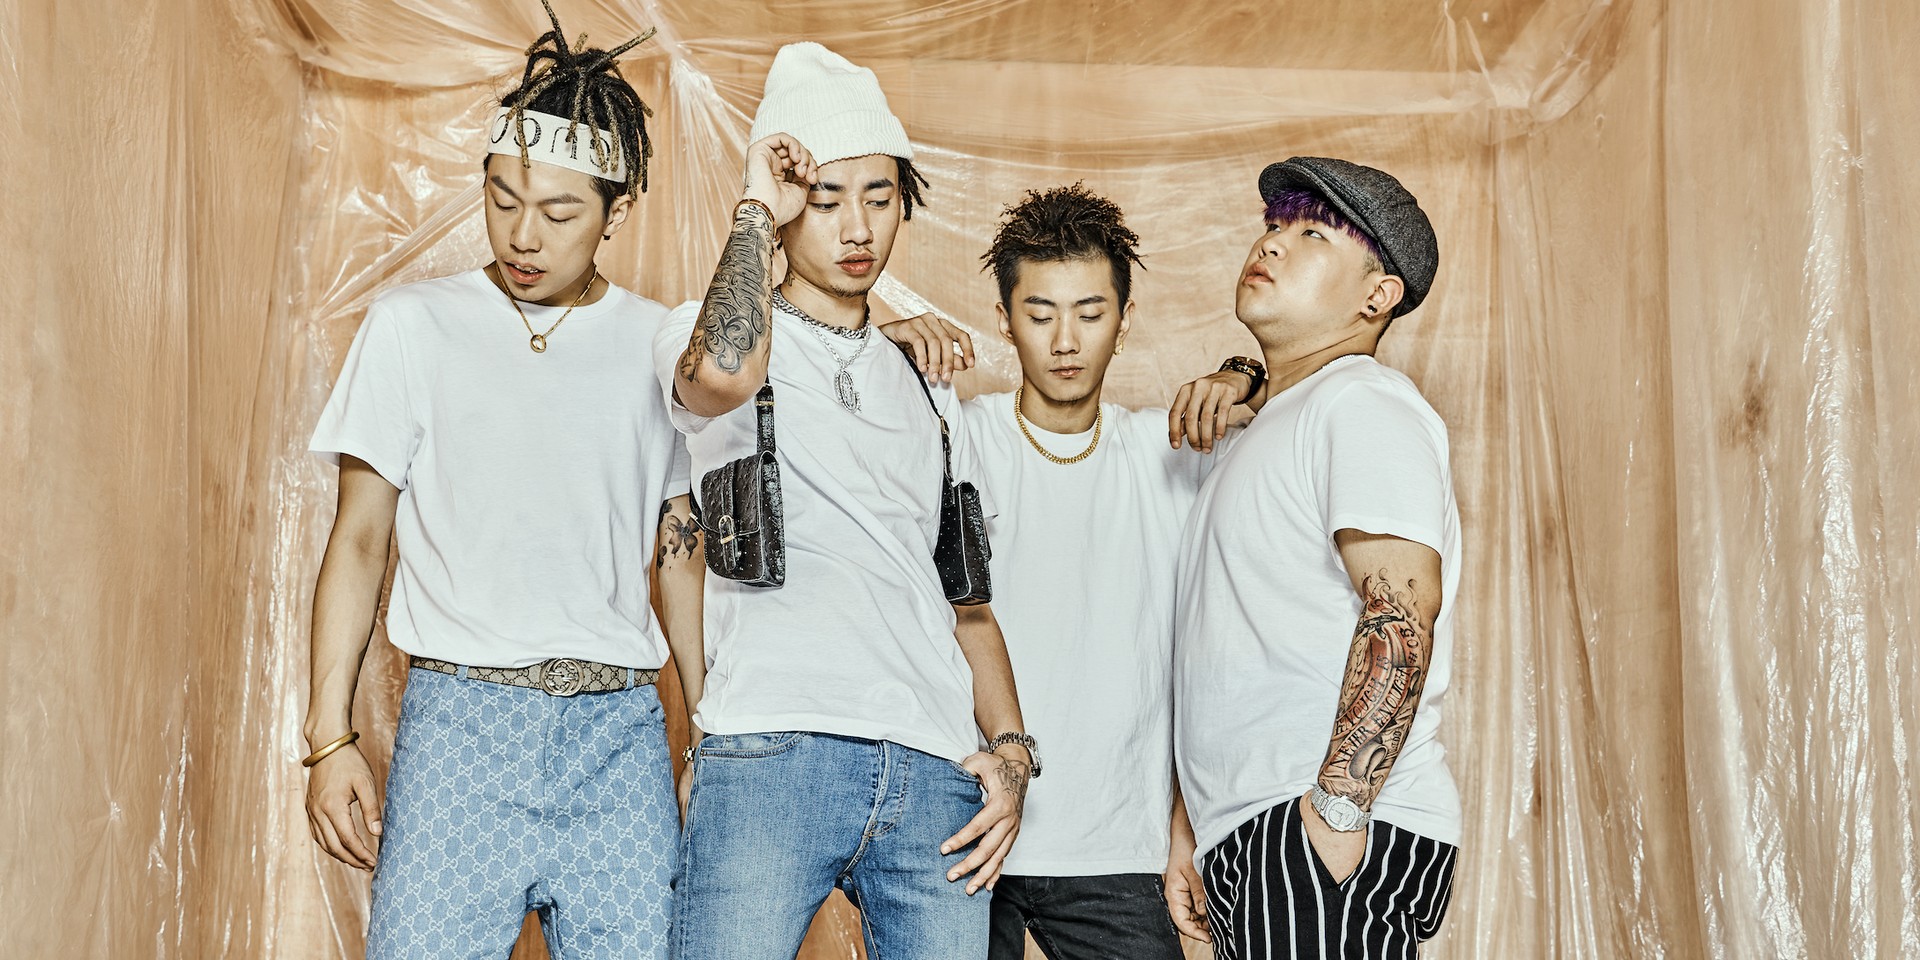 Higher Brothers release new single 'Gong Xi Fa Cai' – listen 